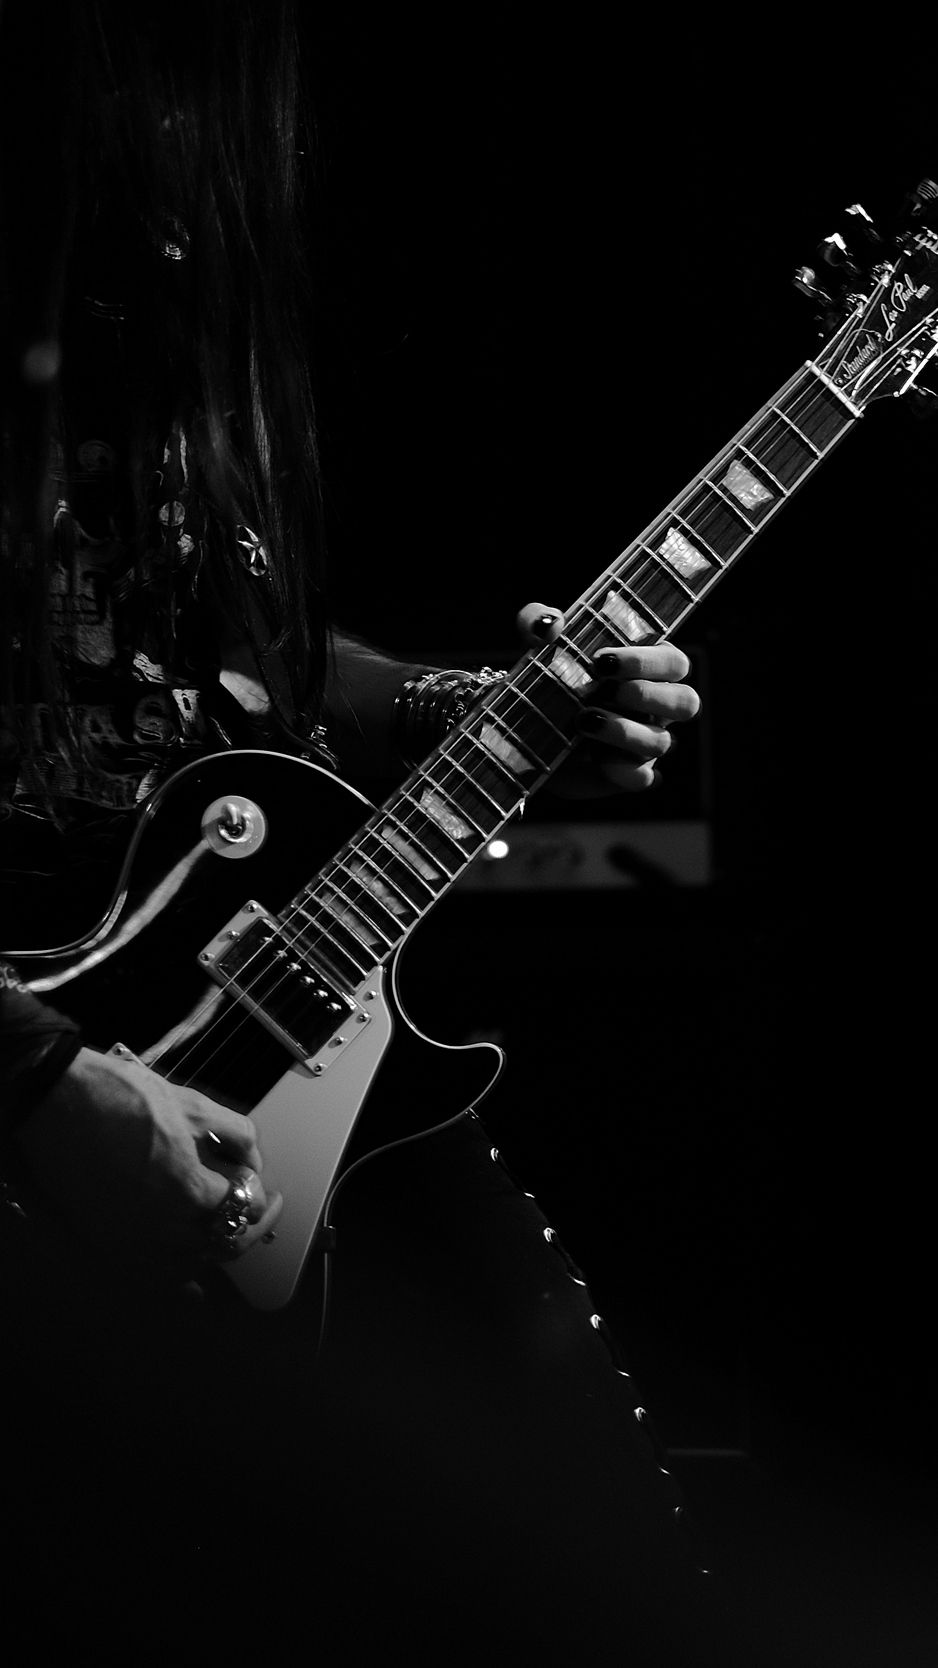 A man playing an electric guitar in black and white. - Guitar